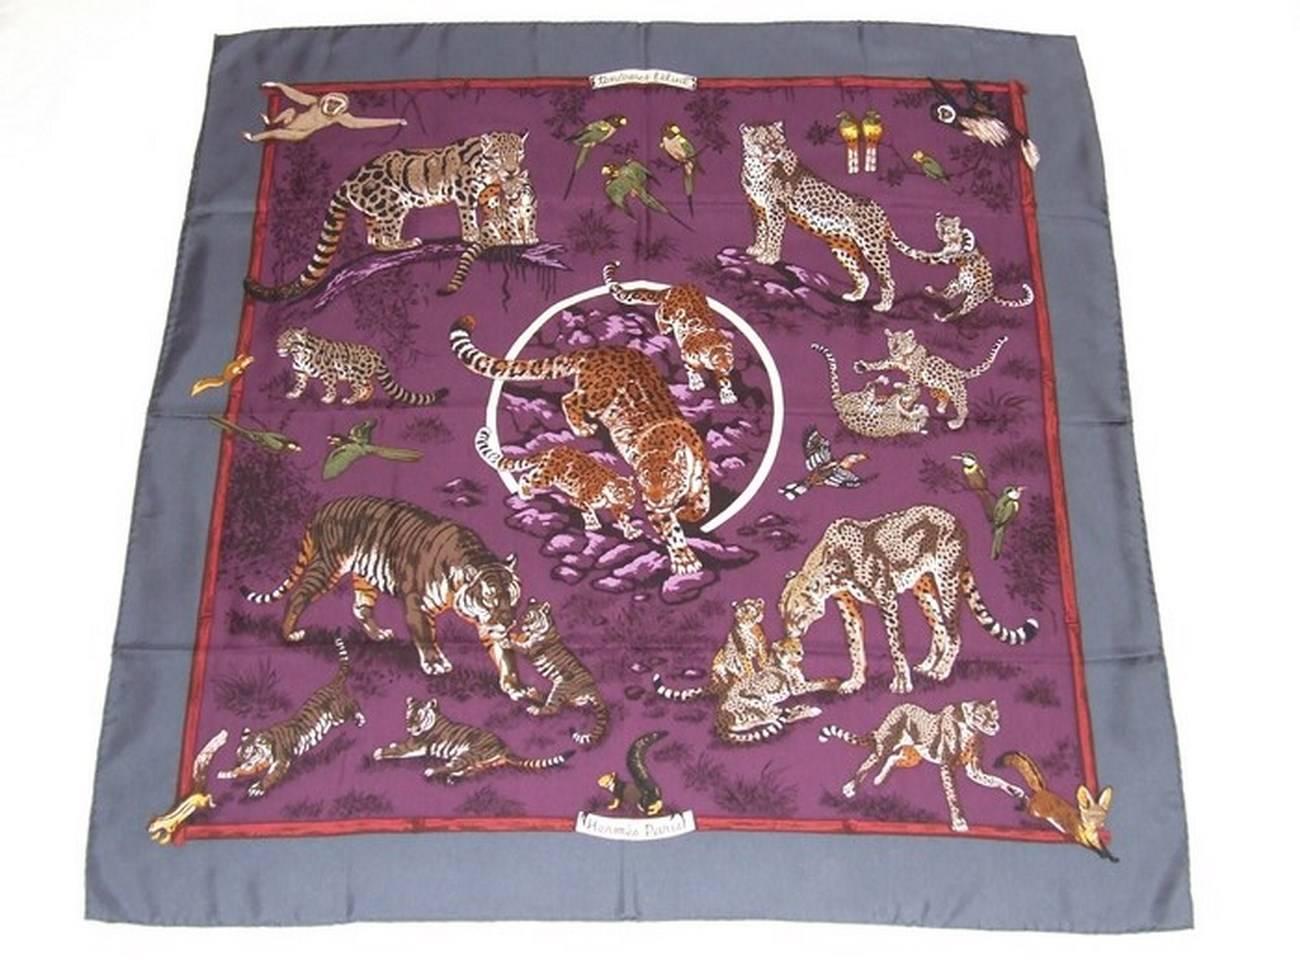 BEAUTIFUL AUTHENTIC HERMES SCARF
 

Called: 